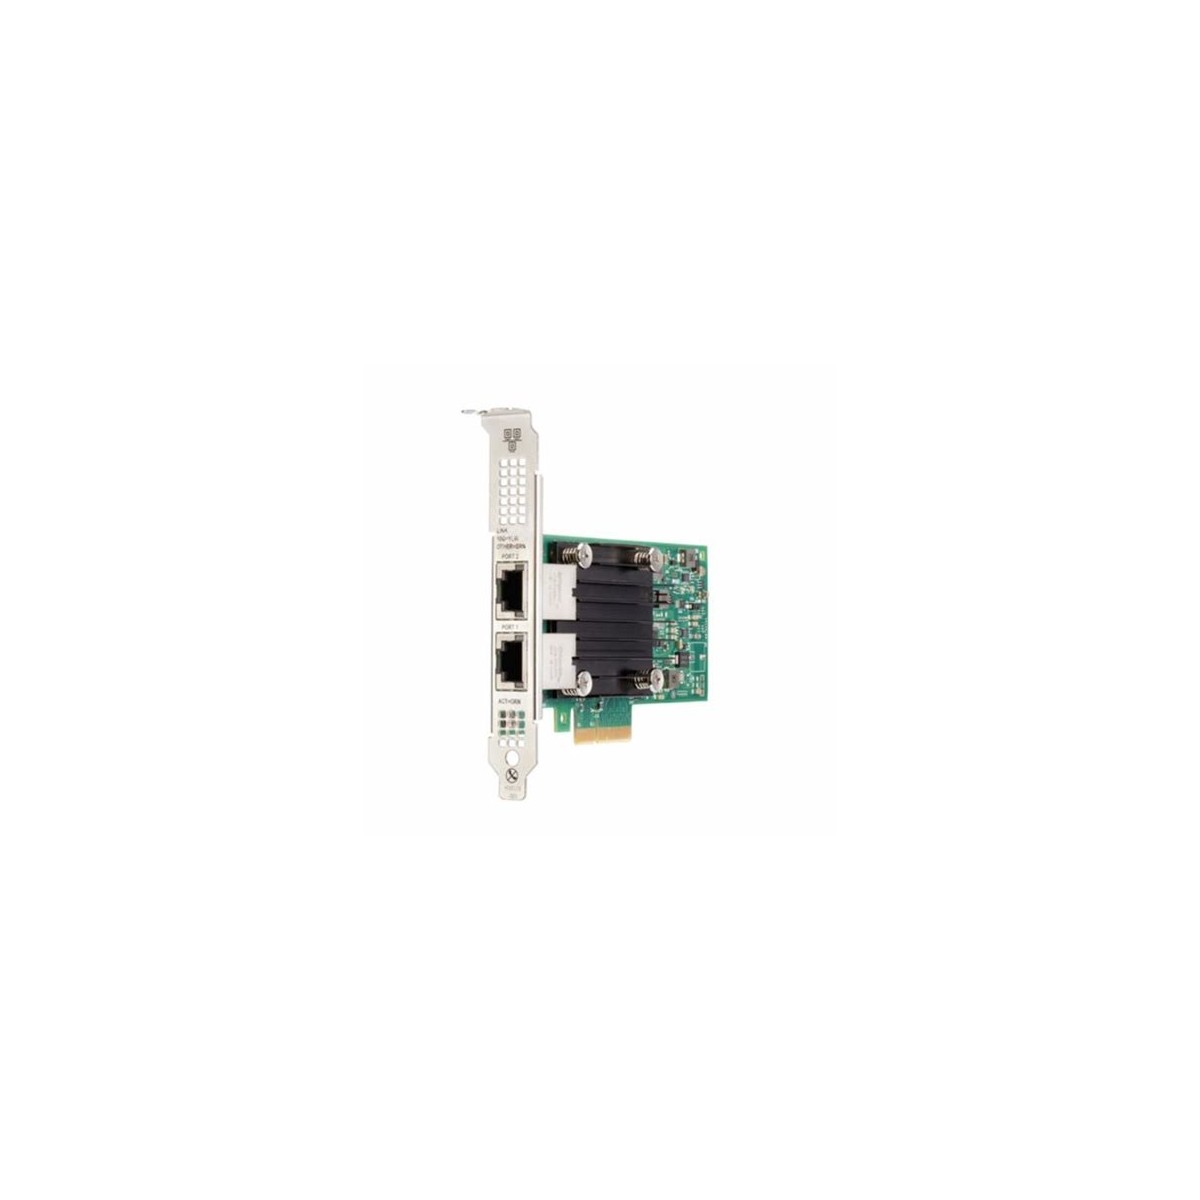 HPE 817738-B21 - Internal - Wired - PCI Express - Ethernet - 10000 Mbit/s